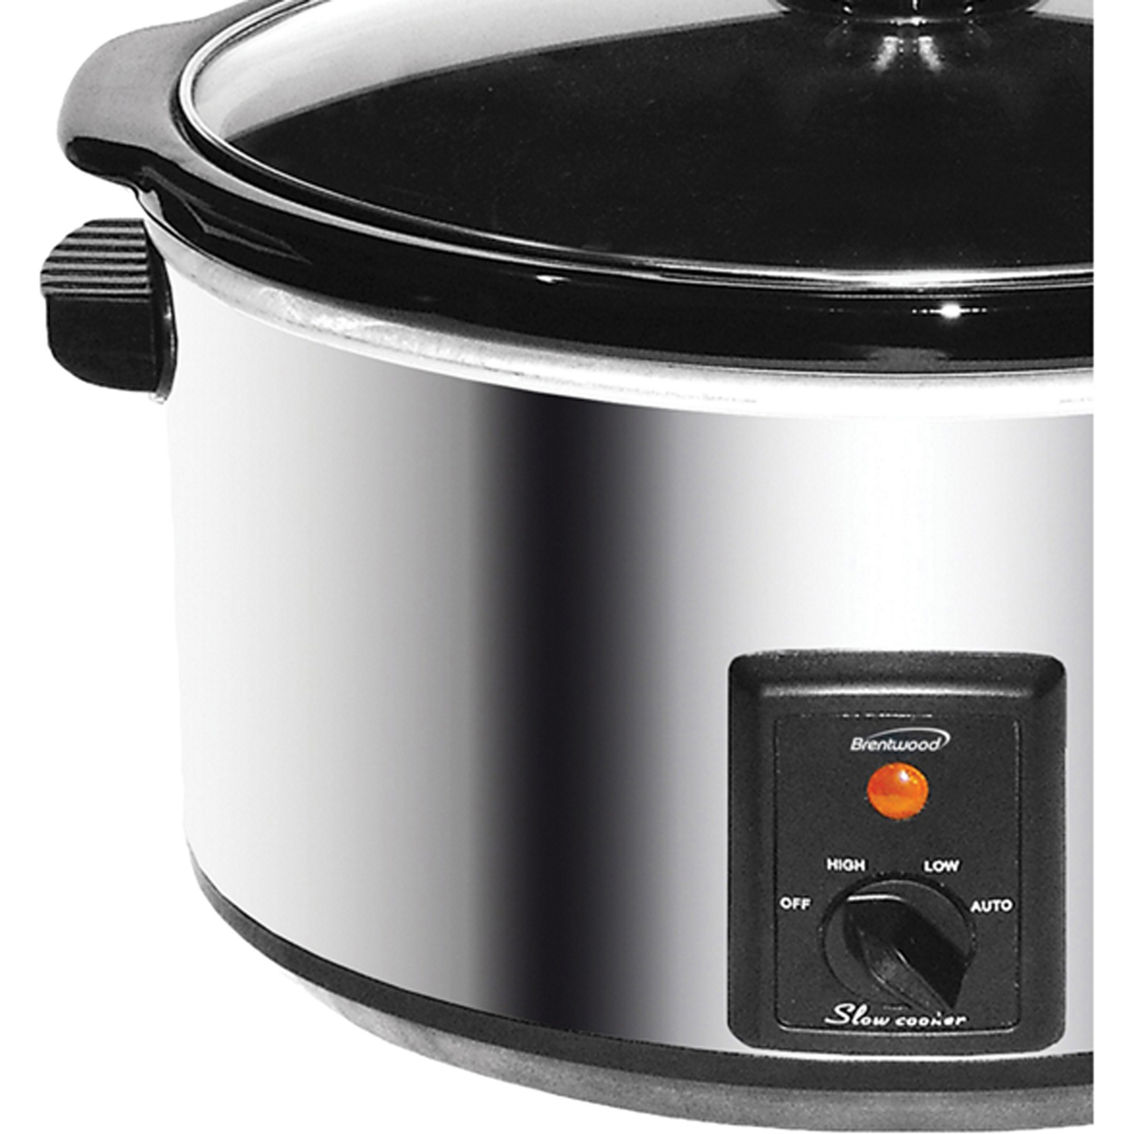 Brentwood 360W Stainless Steel 8 qt. Slow Cooker - Image 6 of 9